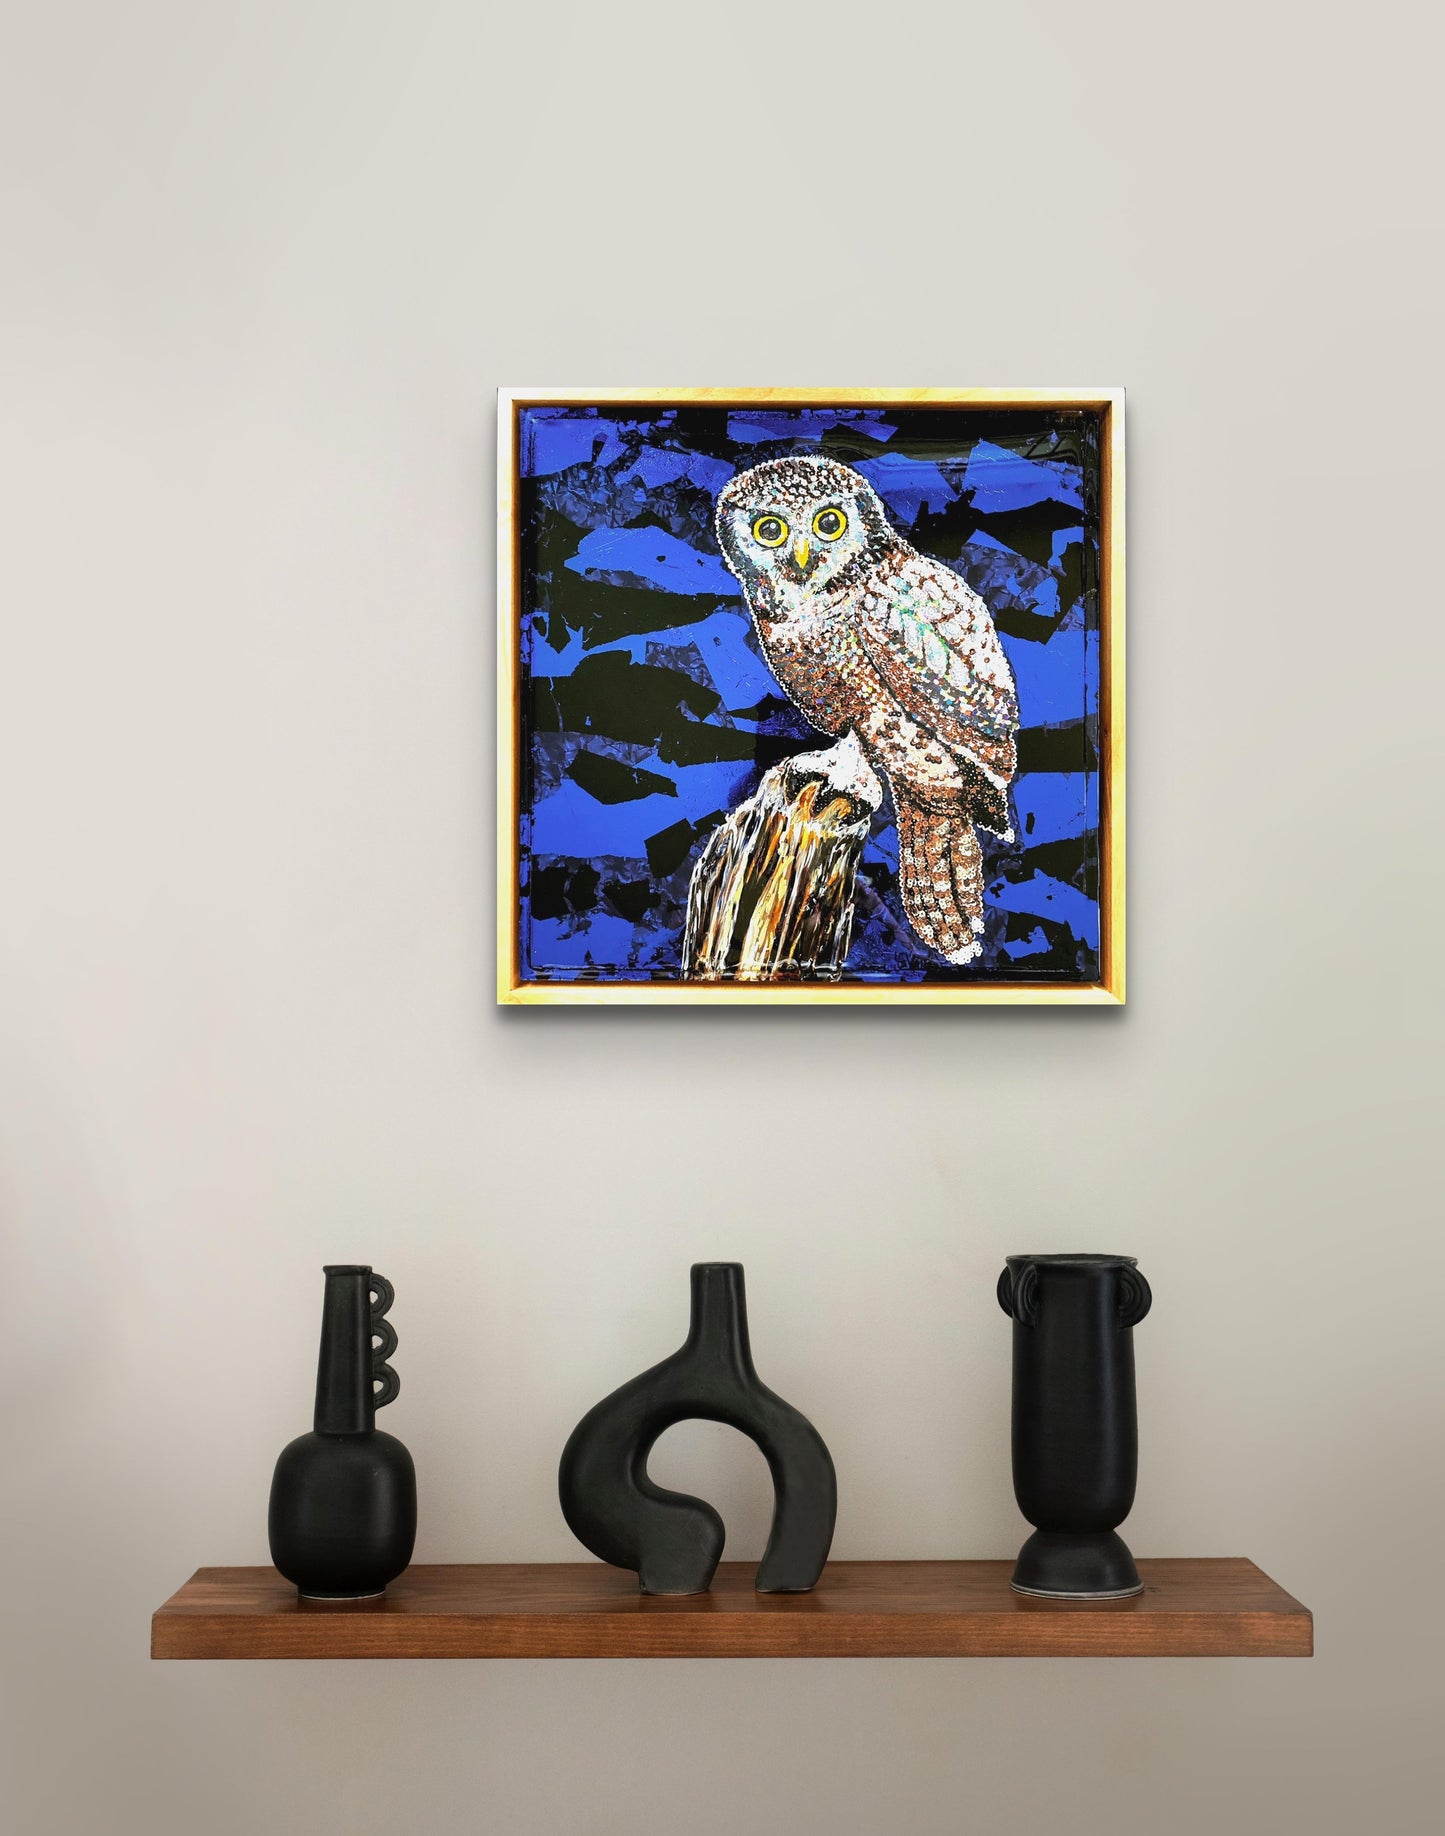 Colorful acrylic painting of owl on blue background; owl is comprised of various colored sequins; resin coating on top; artist Marie Lavallee; shown on wall in situ